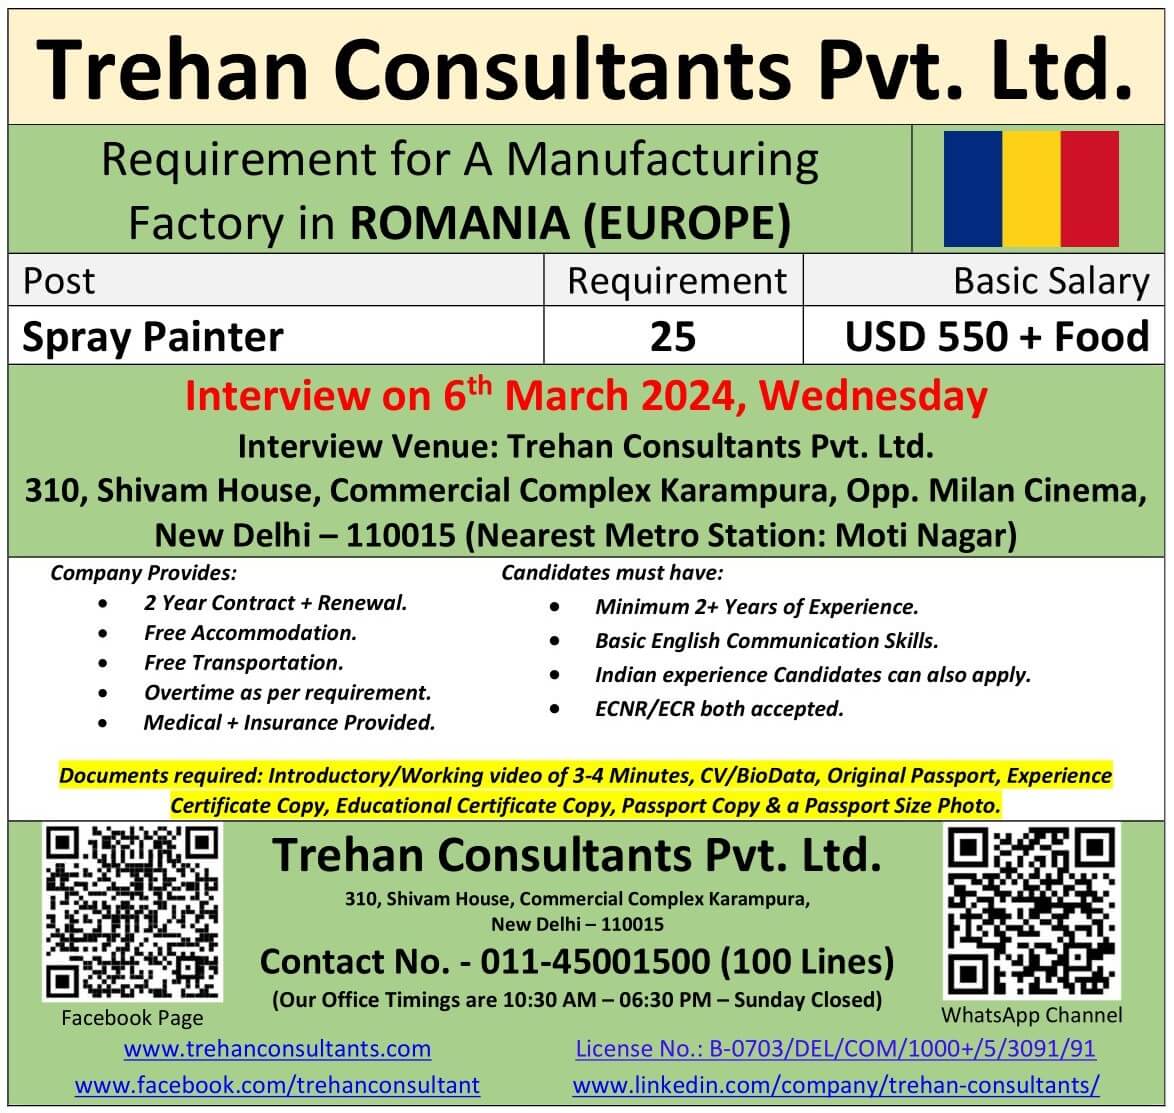 Requirement for a Manufacturing Factory in ROMANIA (EUROPE) - Interview Date : 6 March 2024, Wednesday